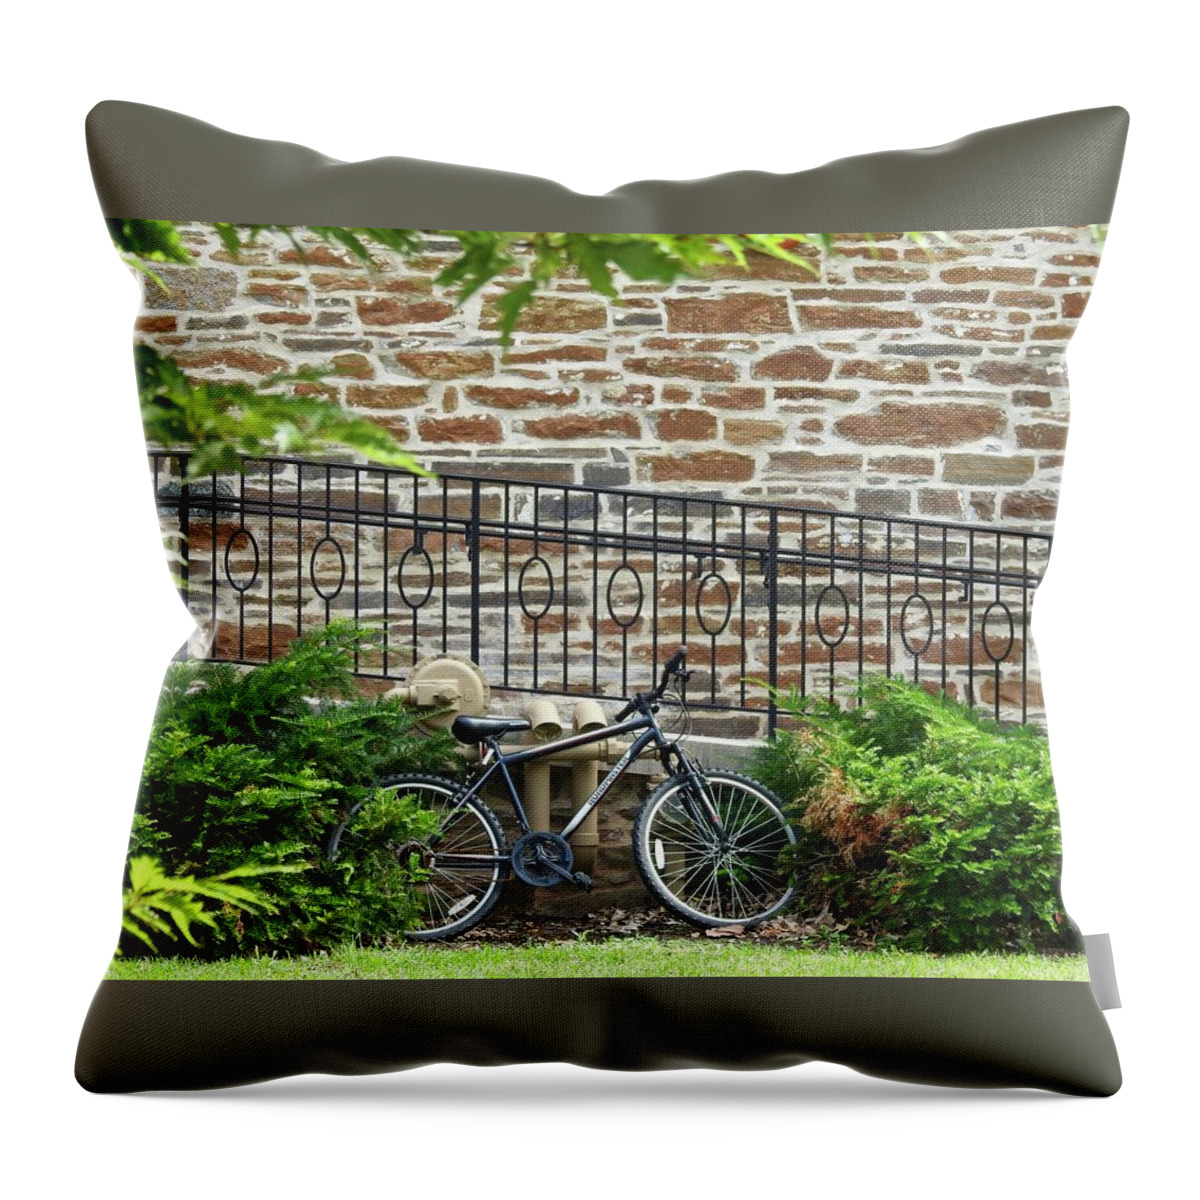 Bicycle Throw Pillow featuring the photograph Parked Dreams by Kathy Ozzard Chism